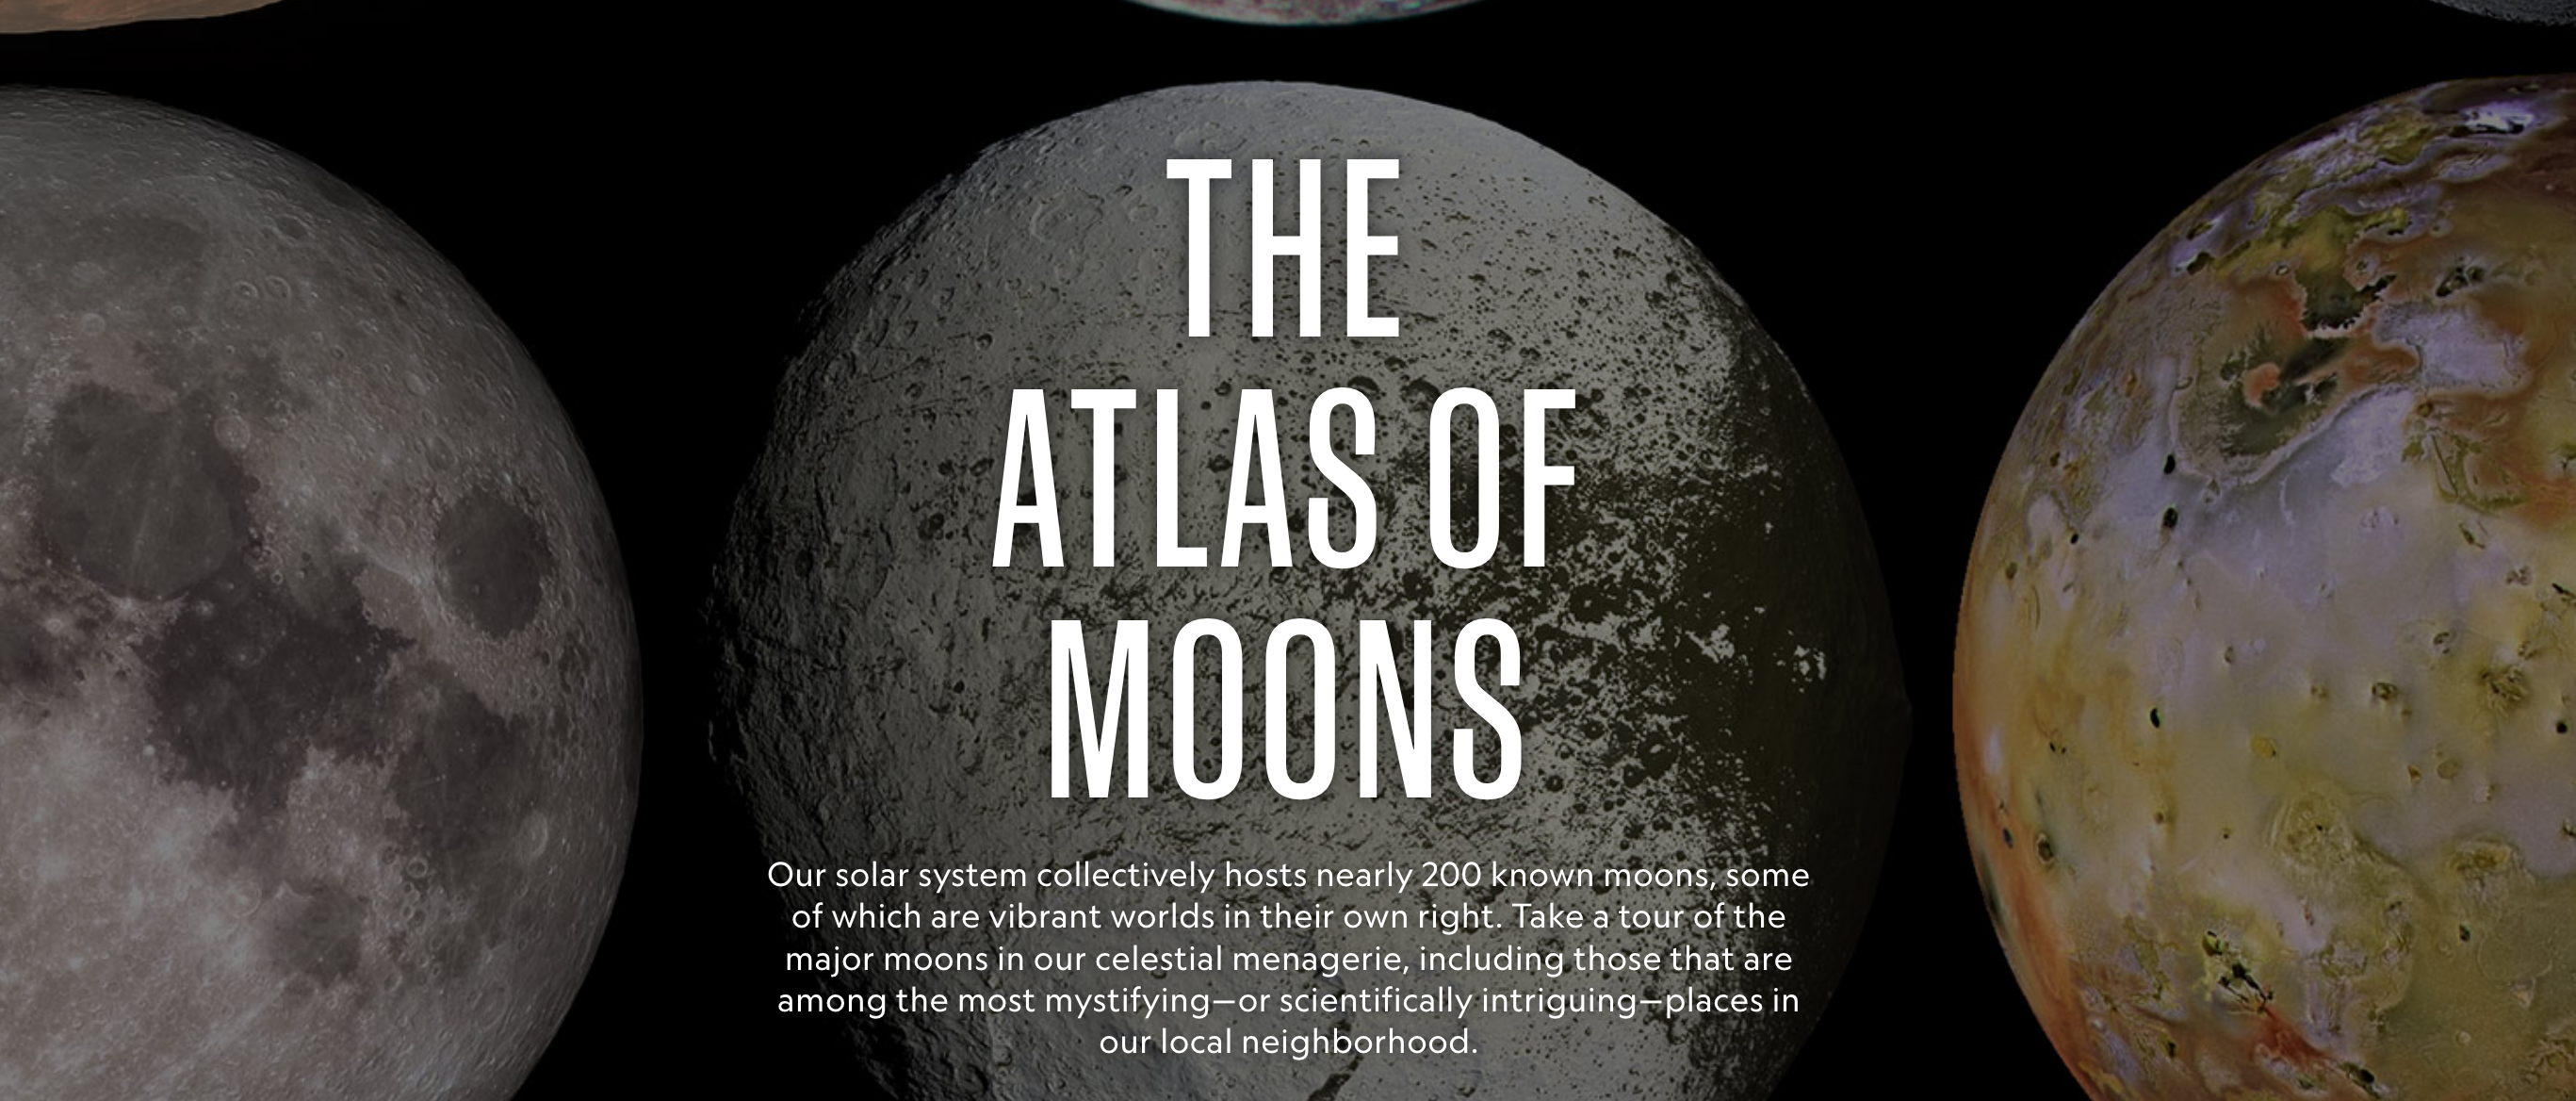 Image from the online atlas created by National Geographic providing a comprehensive look at the moons, including those significant to the study of life in the universe, that populate our cosmic neighborhood. Source: <a href="https://www.nationalgeographic.com/science/2019/07/the-atlas-of-moons/?cmpid=org=ngp::mc=crm-email::src=ngp::cmp=editorial::add=Science_20190717::rid=00000000001036279278" target="_blank">National Geographic</a> Image credit: None